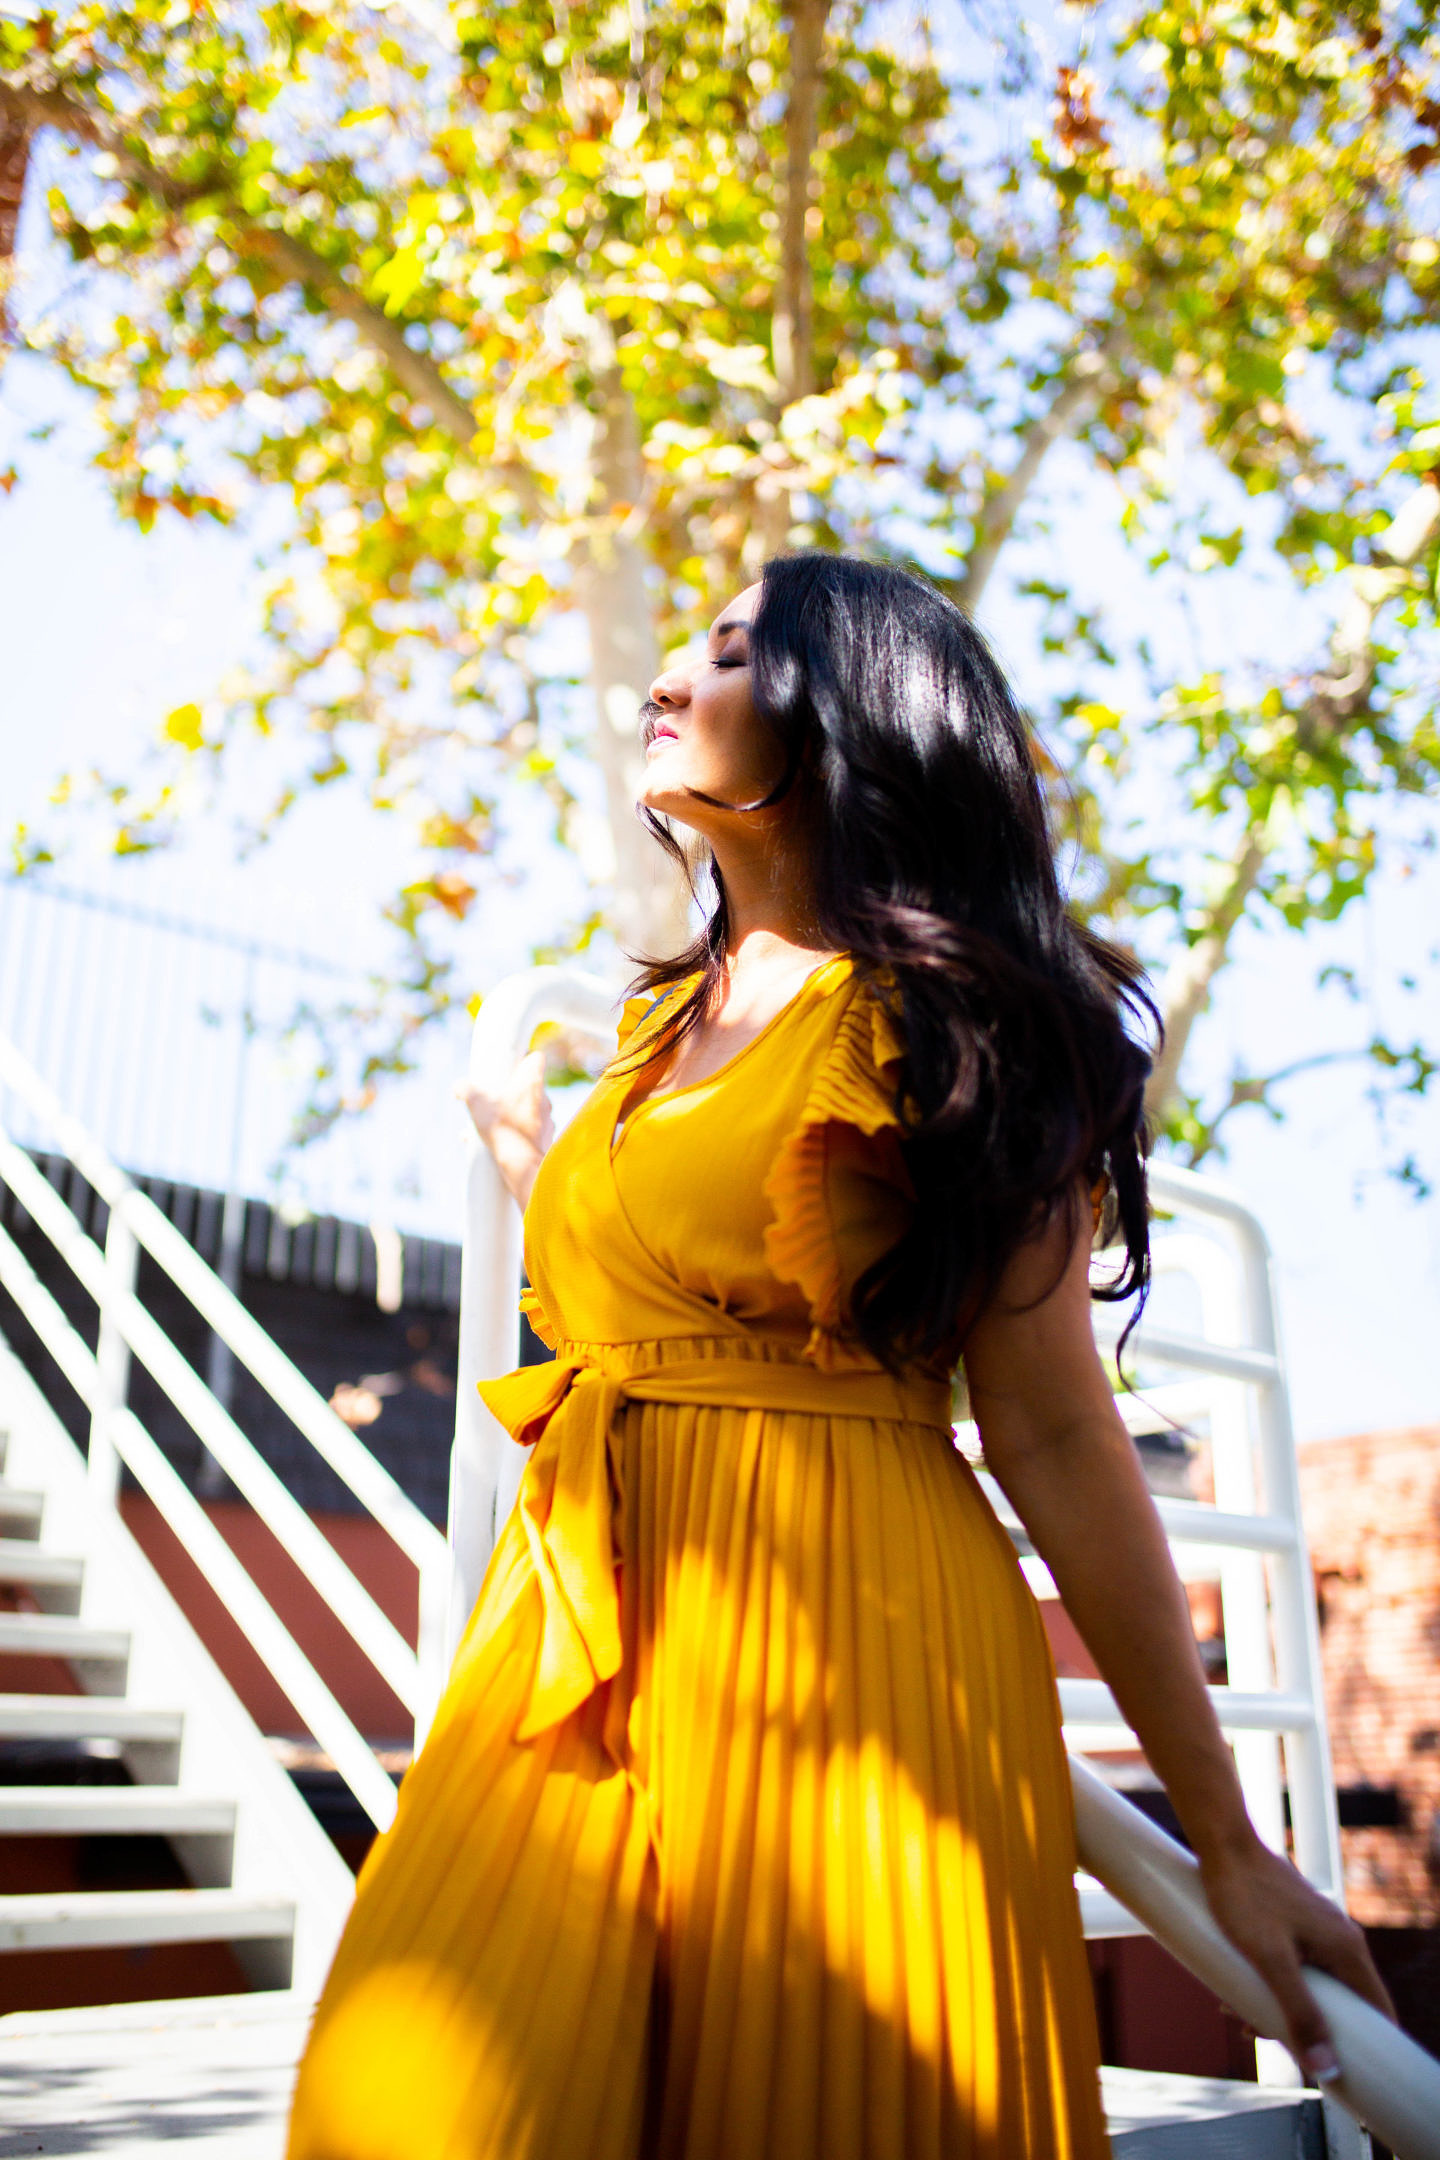 Curious how to incorporate a yellow pleated dress into your wardrobe? Orange County Blogger Debbie Savage is sharing her favorite way to style a yellow pleated dress here!